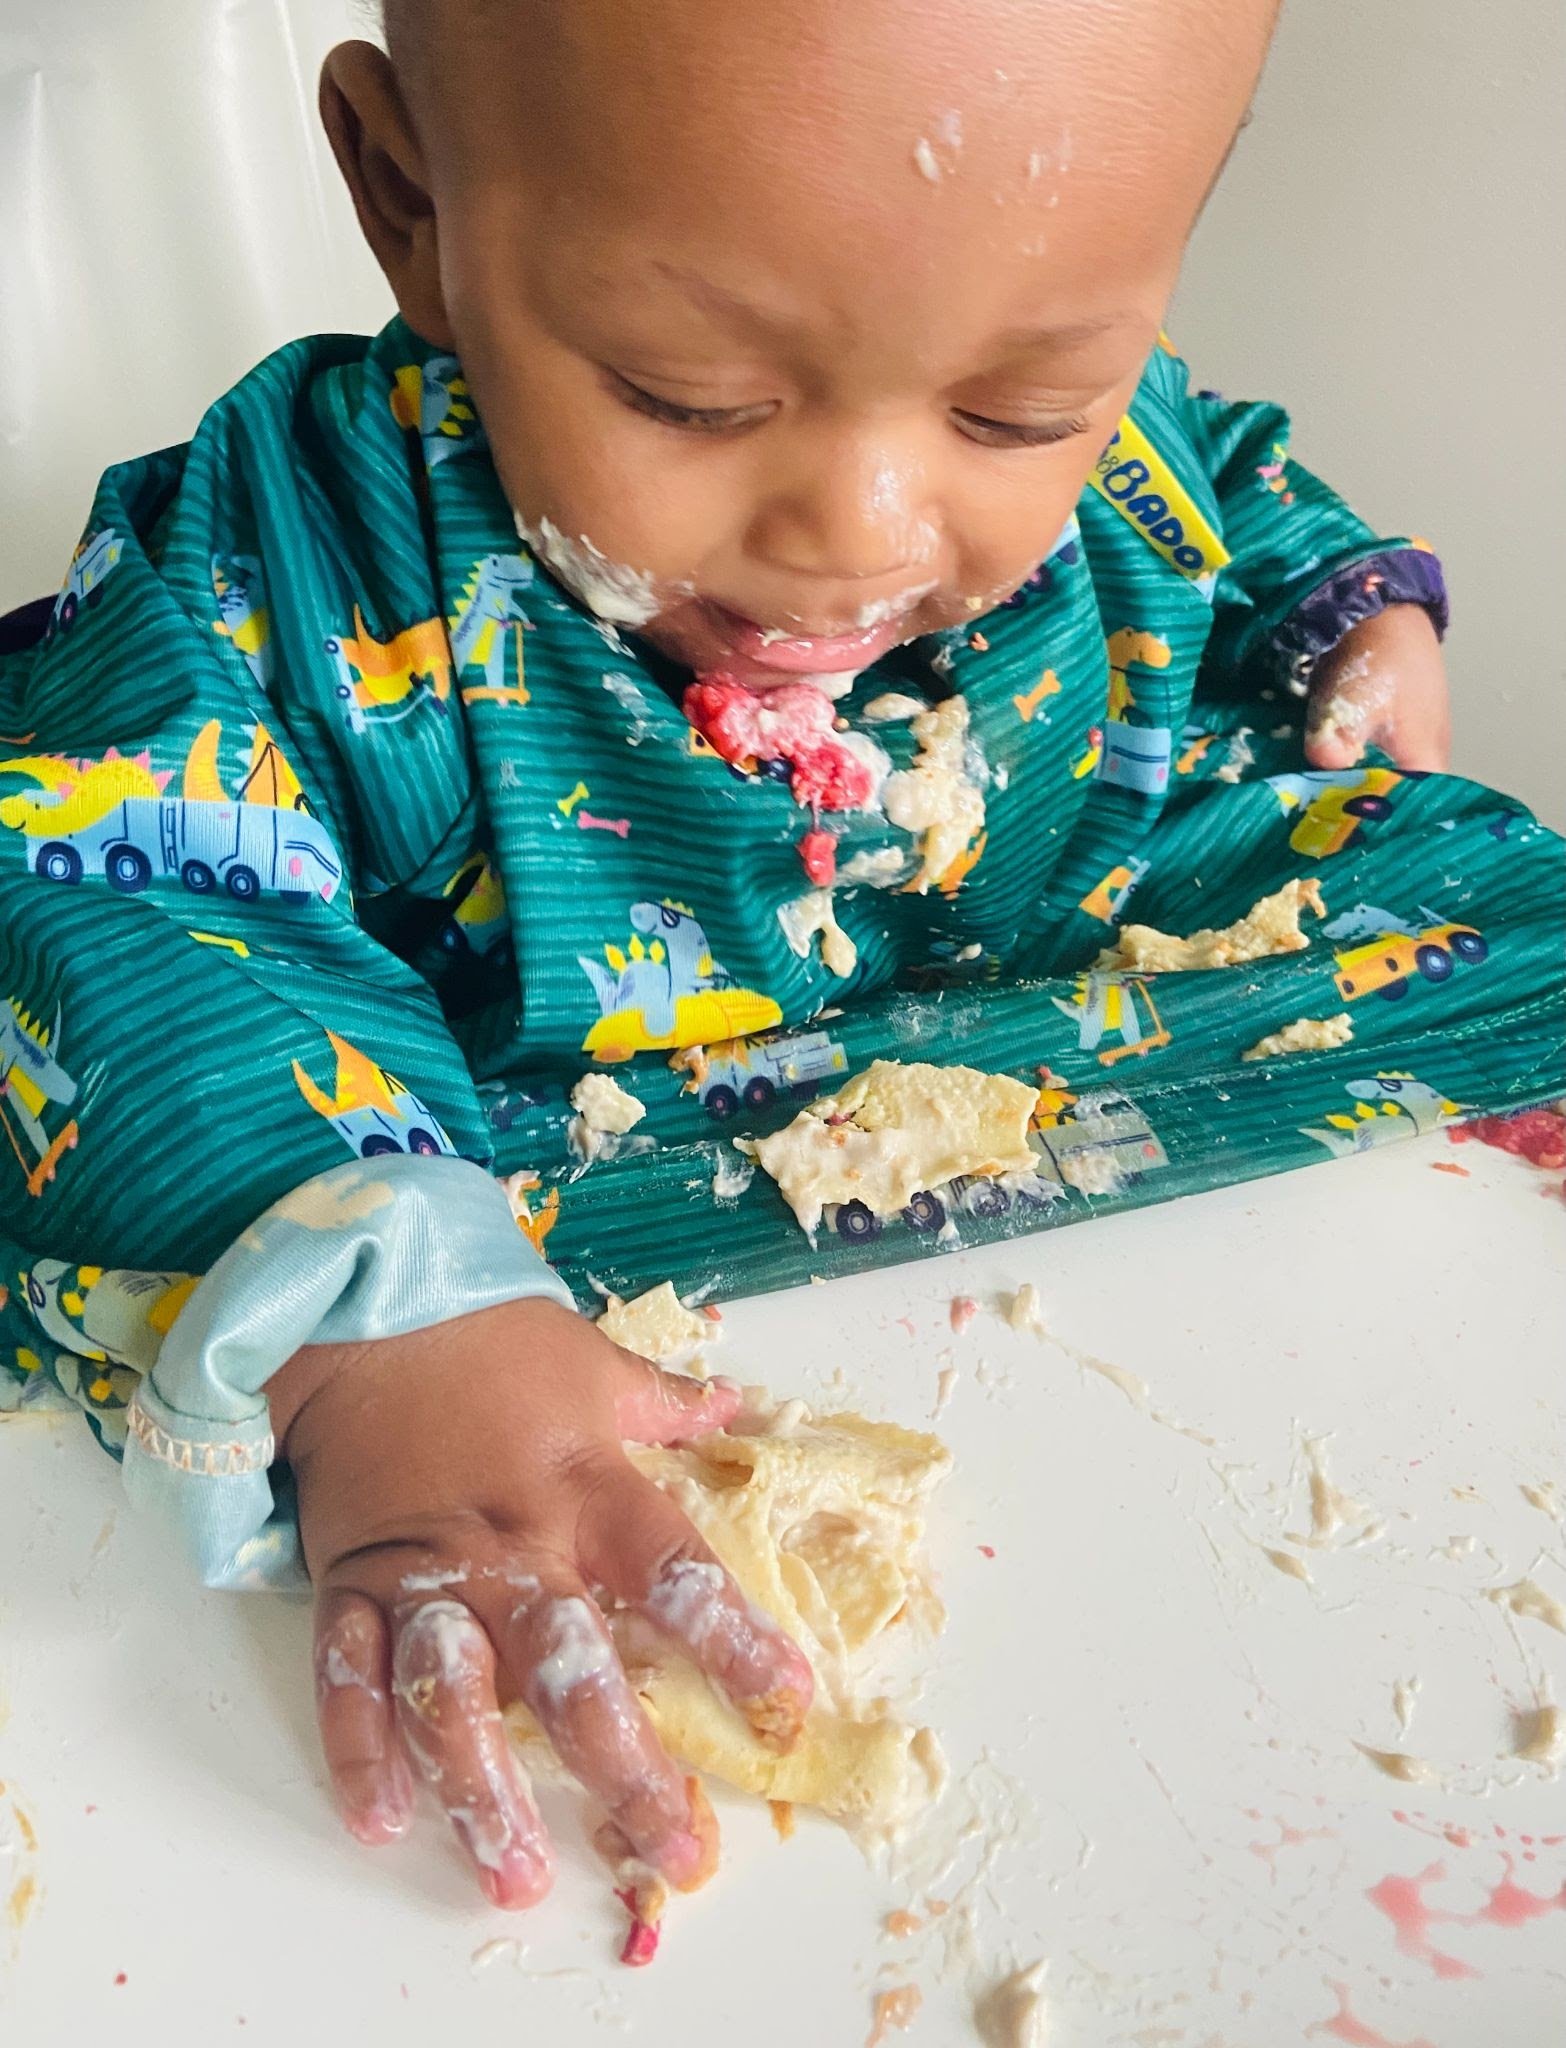 Messy baby eating breakfast baby-led weaning